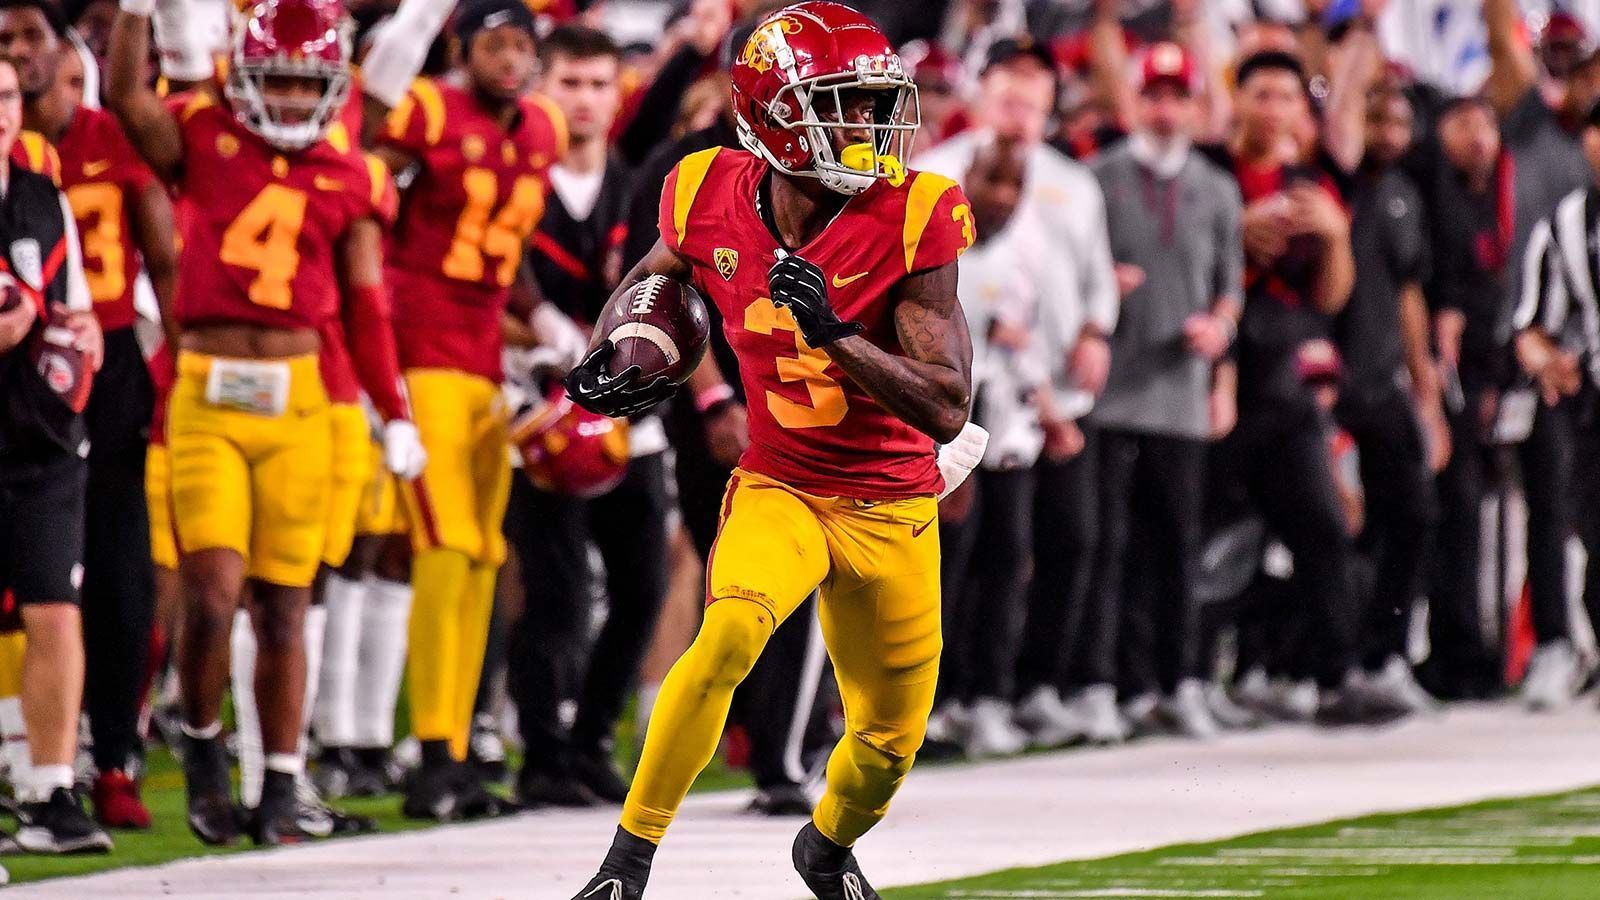 
                <strong>Jordan Addison</strong><br>
                &#x2022; Position: Wide Receiver<br>&#x2022; College: University of Southern California<br>
              